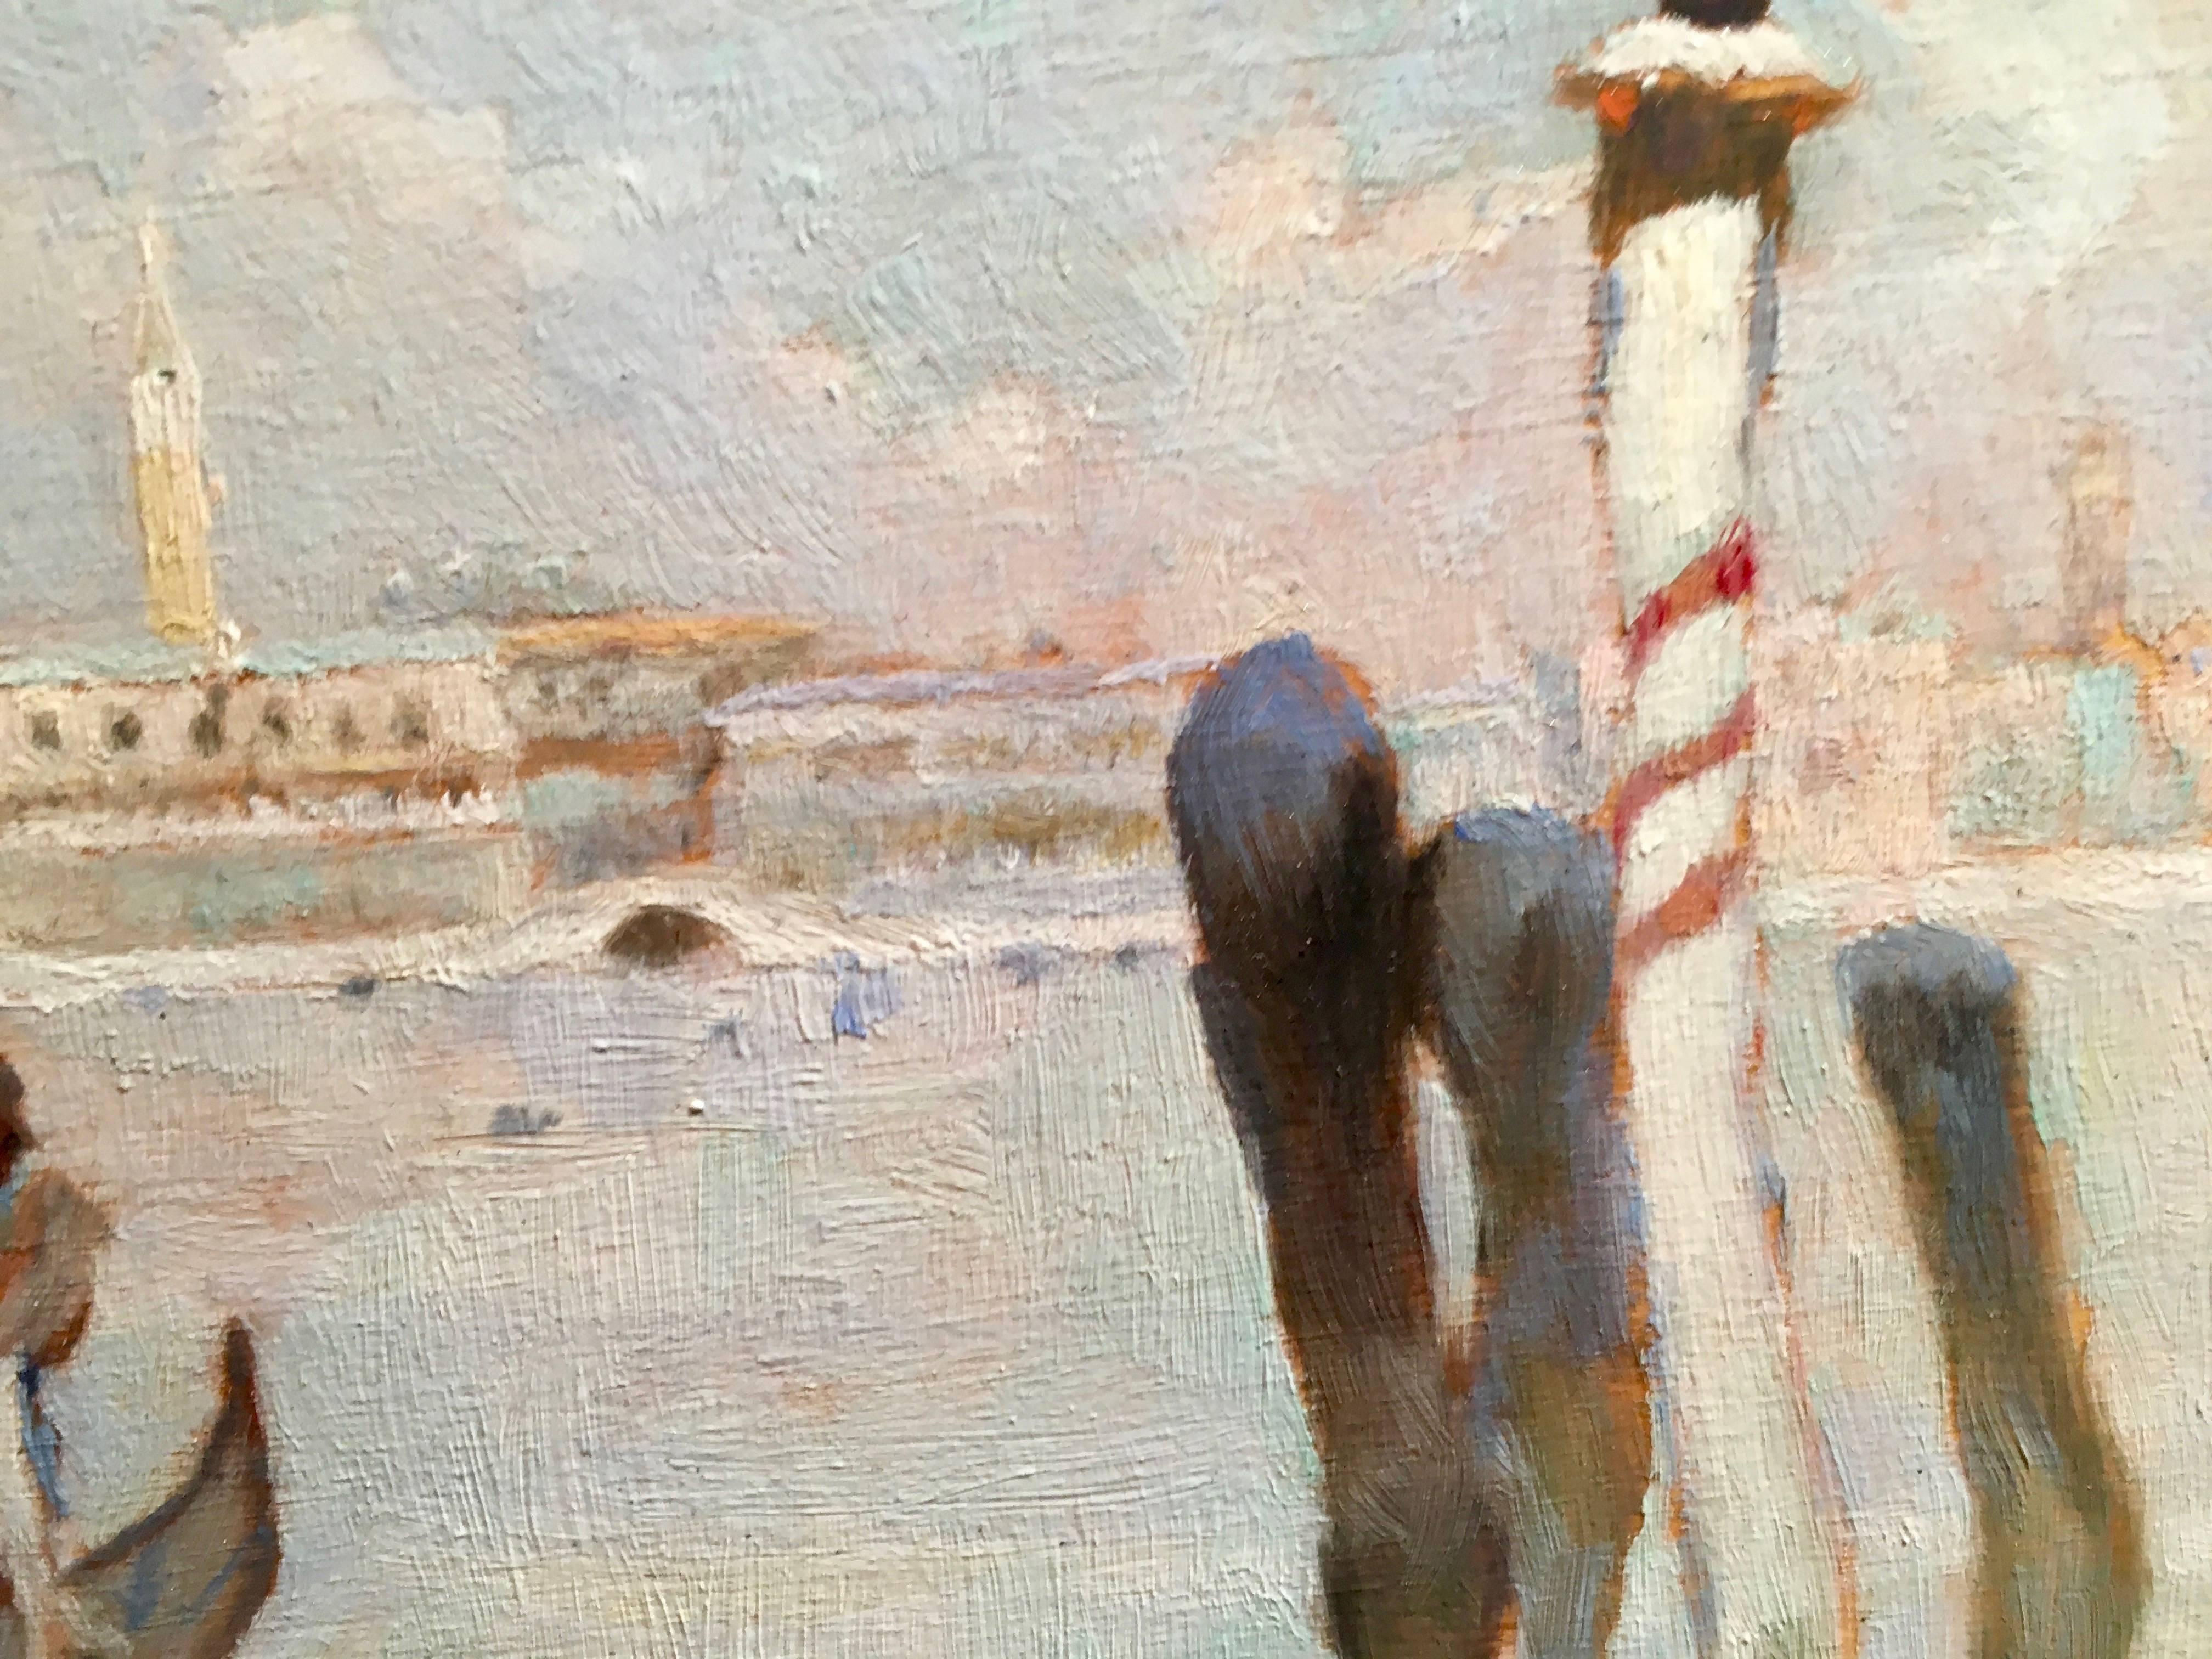 Early 20th century Gondola on a canal in Venice Italy - Painting by David Woodlock